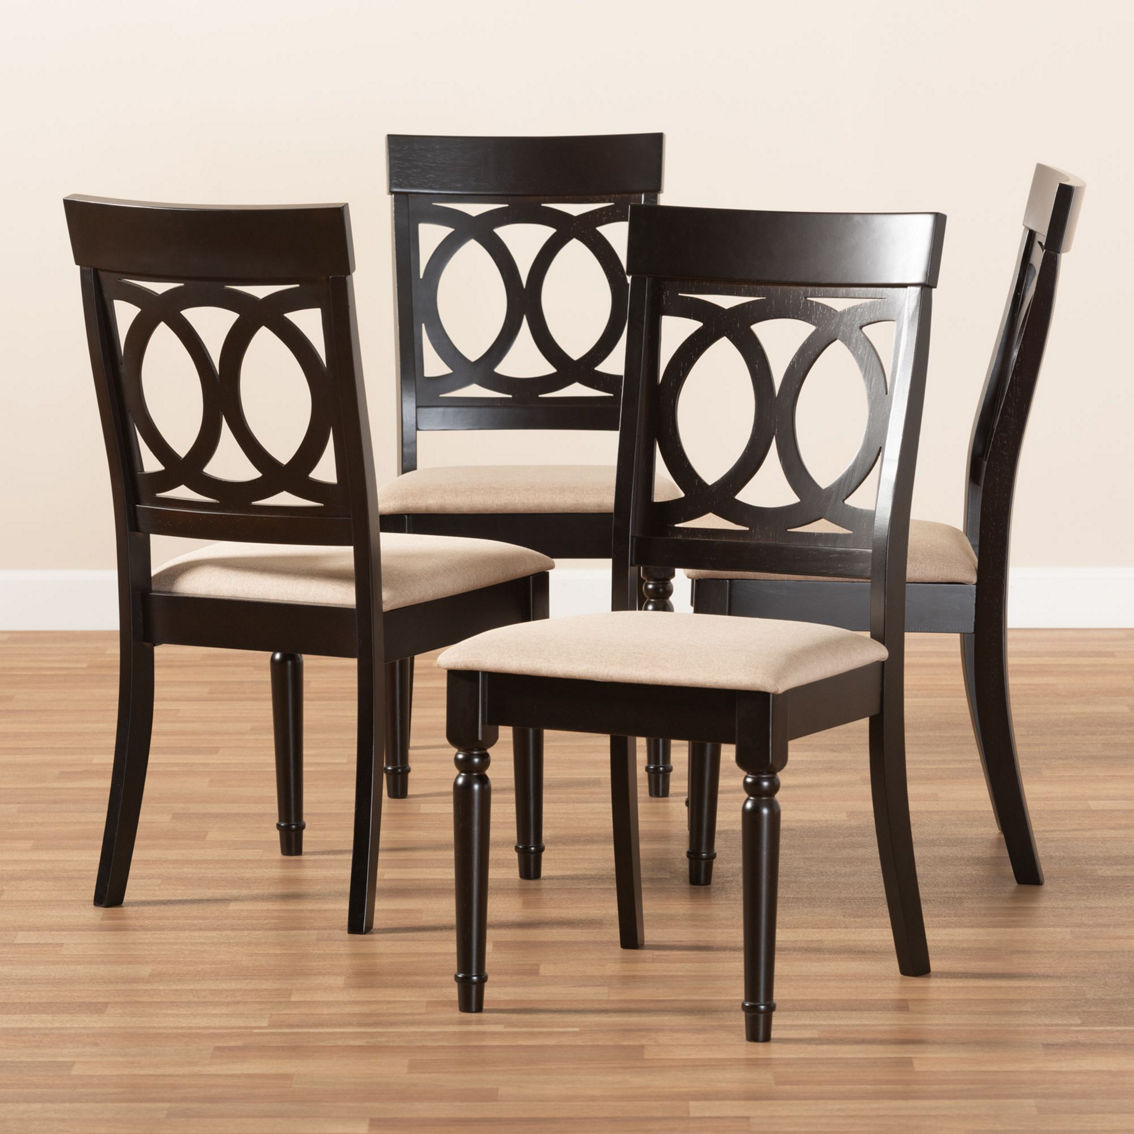 Baxton Studio Lucie Fabric Upholstered Wood Dining Chair 4 Piece Set - Image 5 of 5